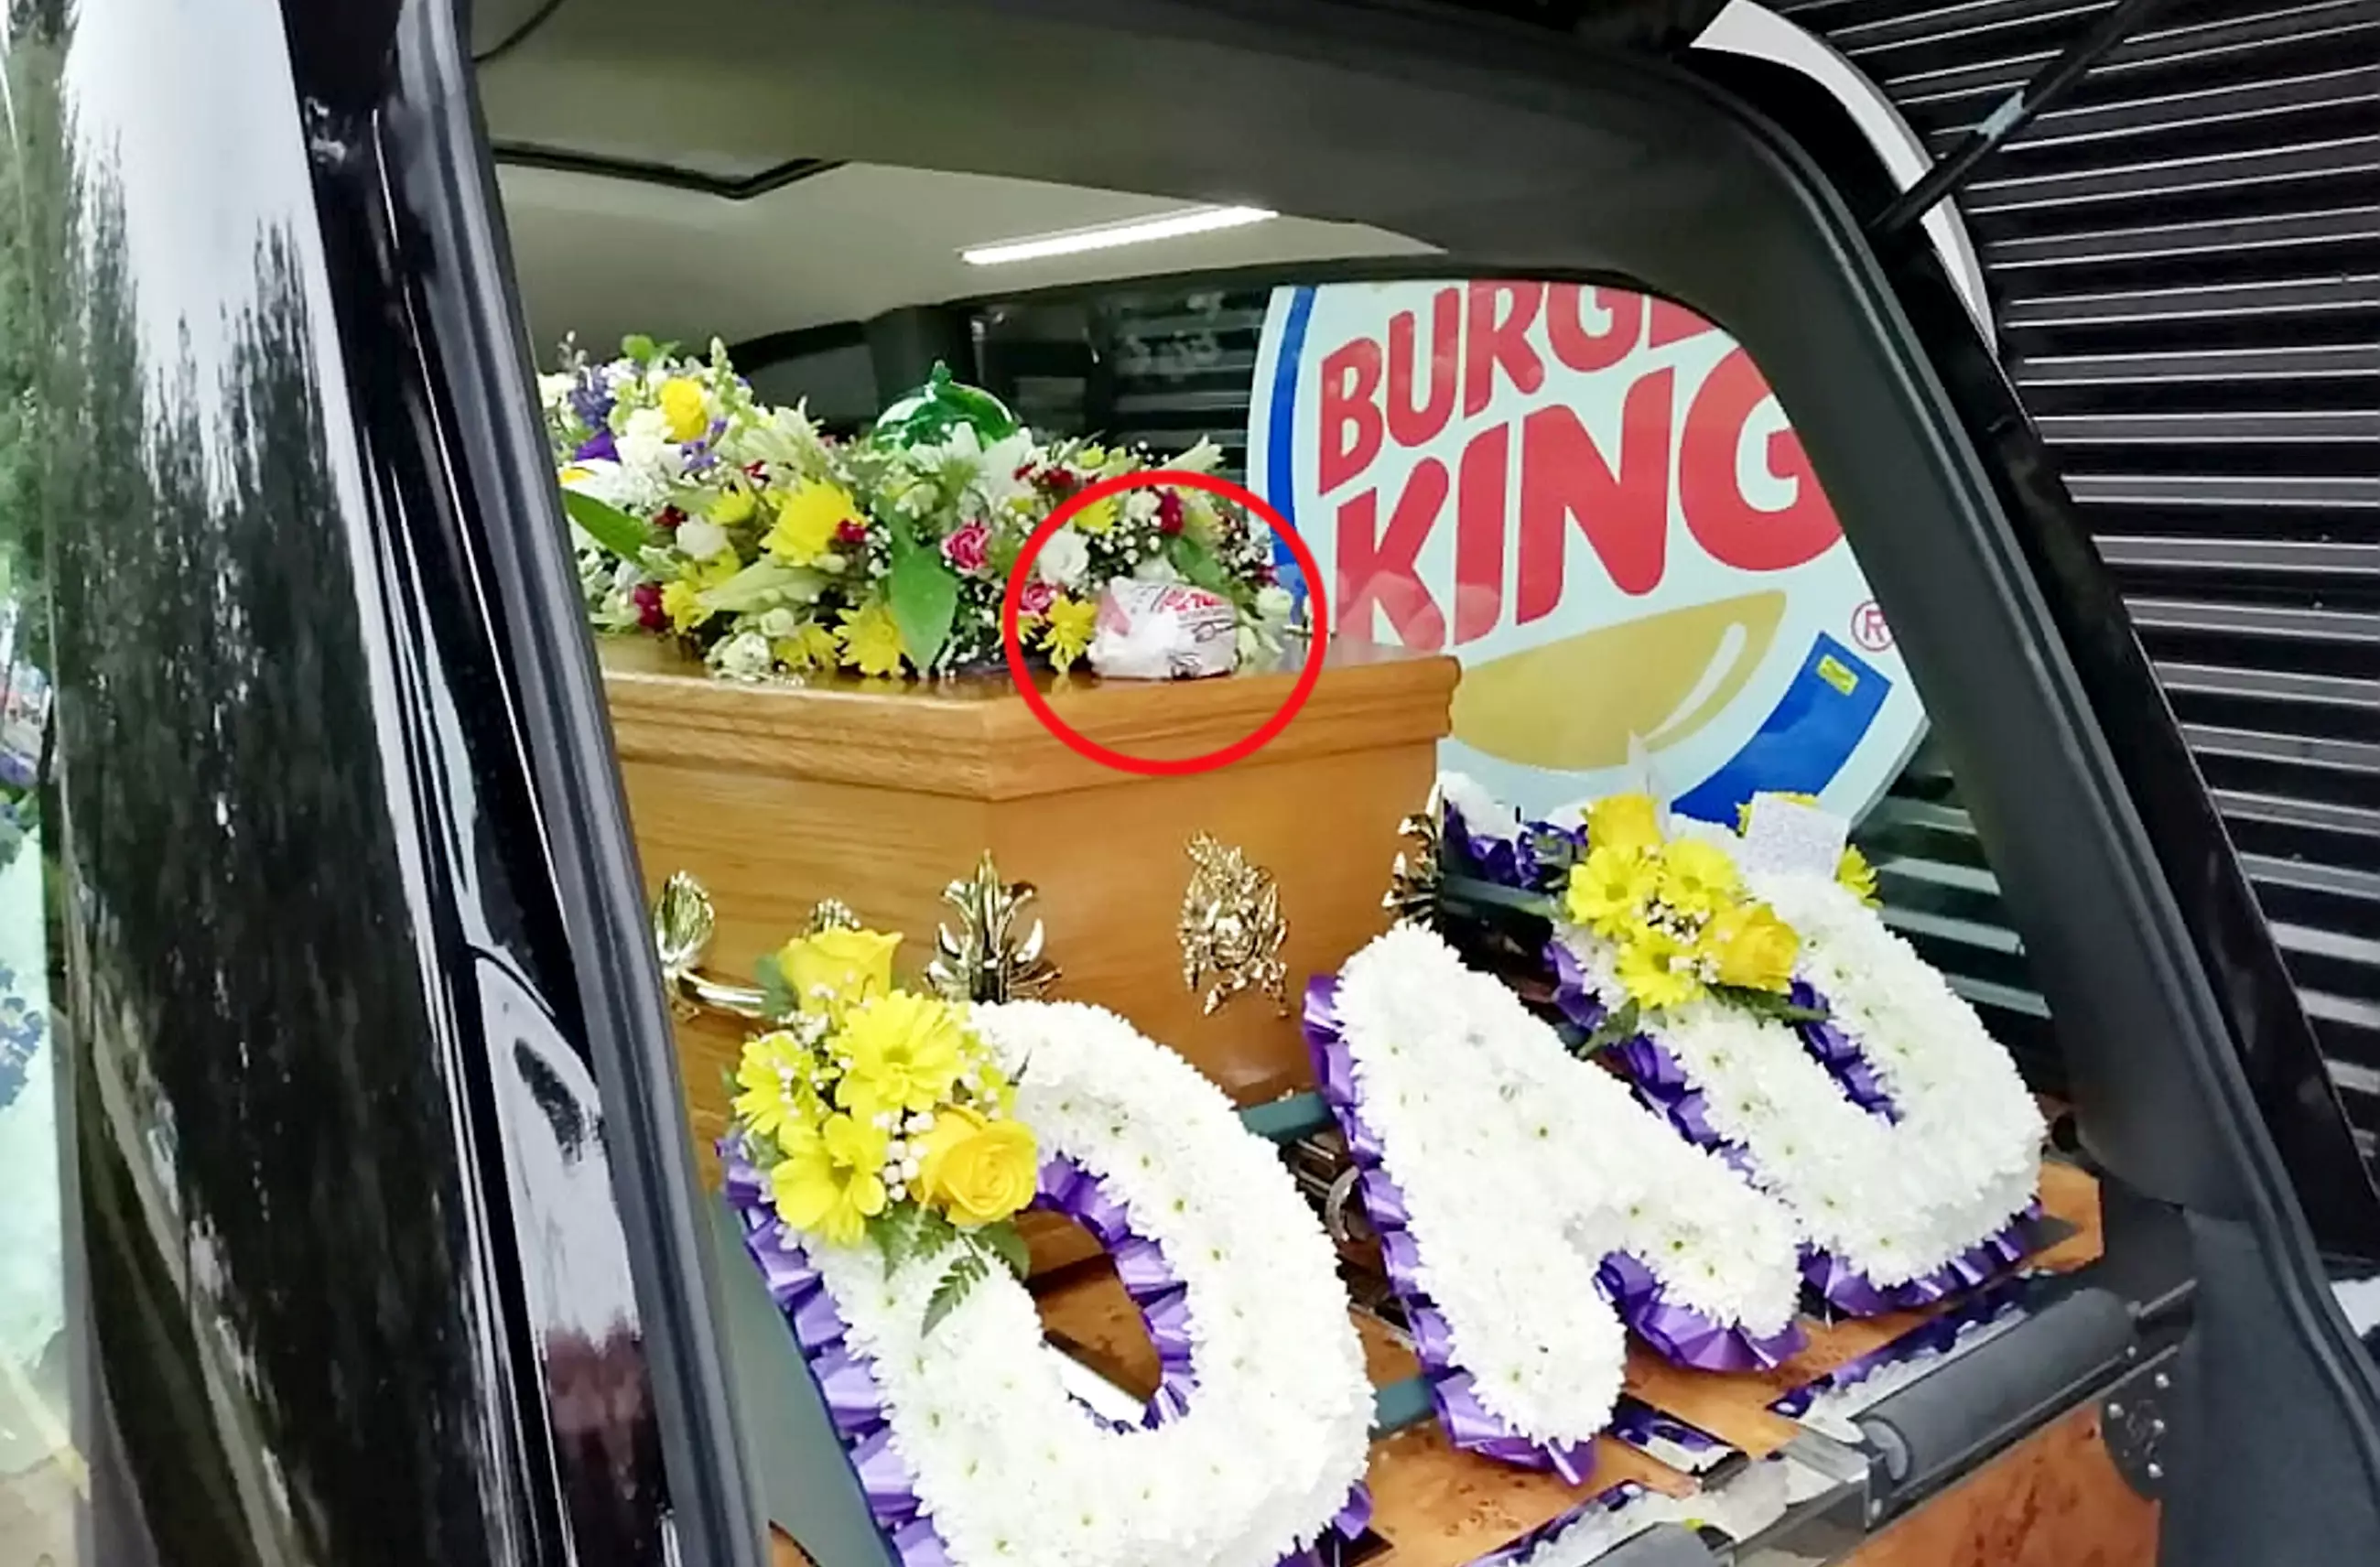 The Bacon Double Cheeseburger was placed lovingly on the coffin.